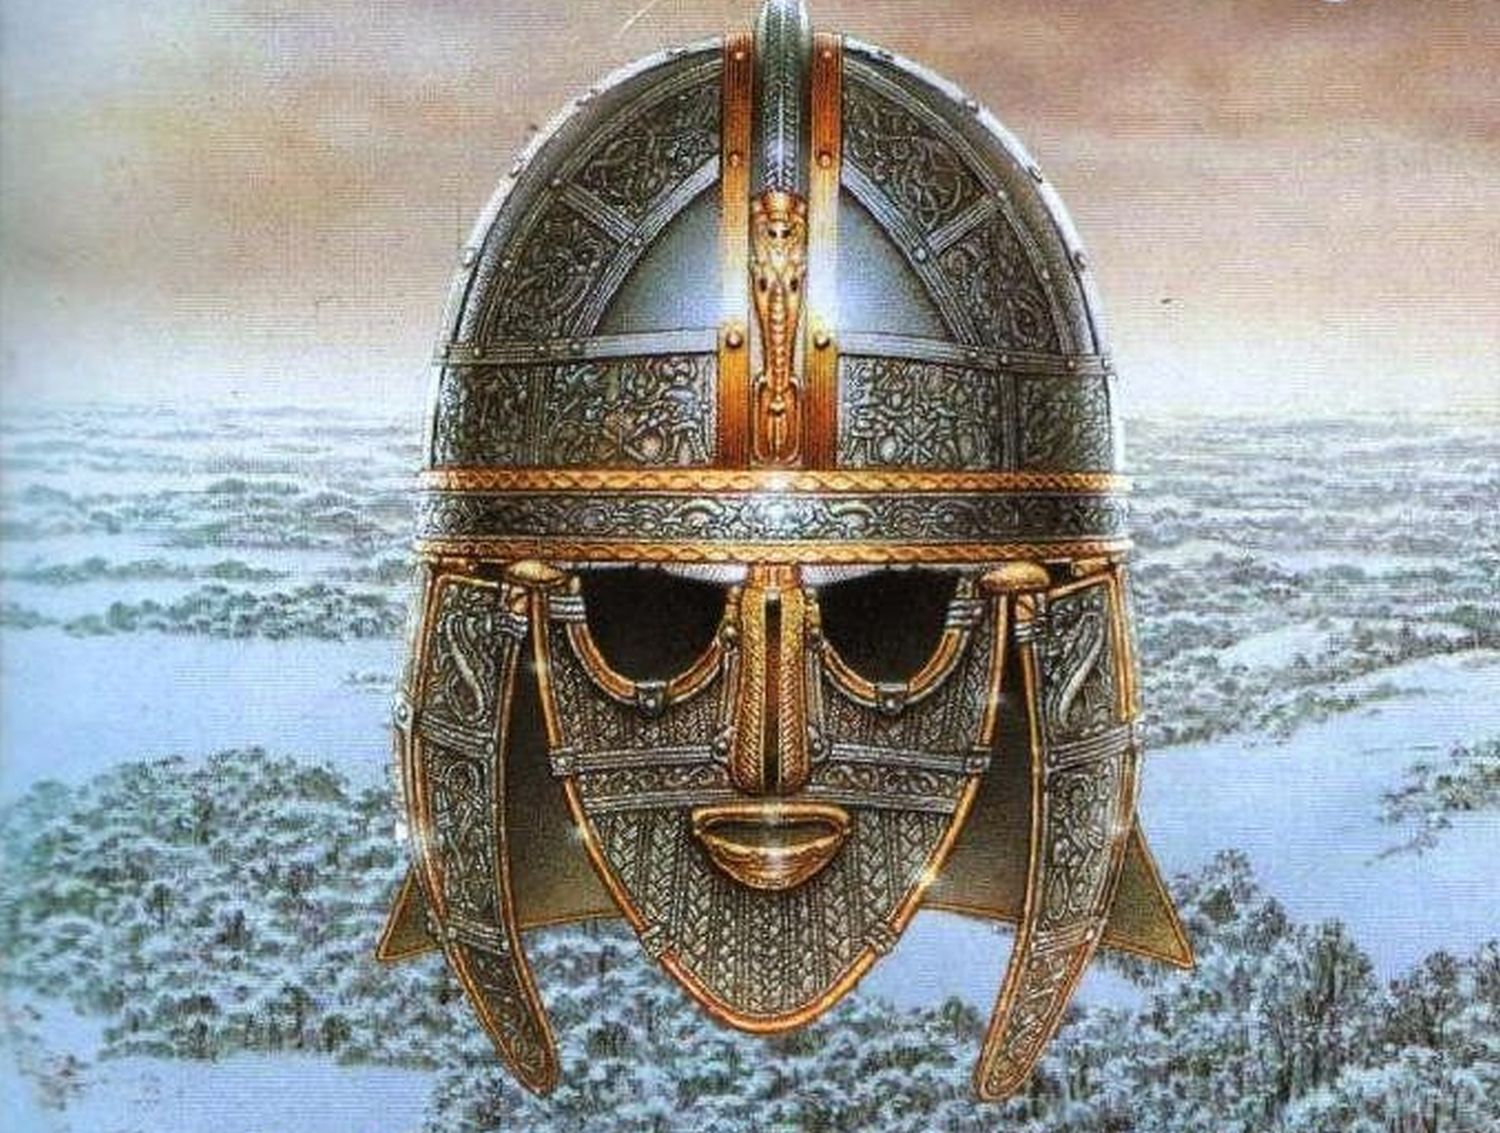 Cover art from Bernard Cornwell’s The Winter King from The Warlord Chronicles